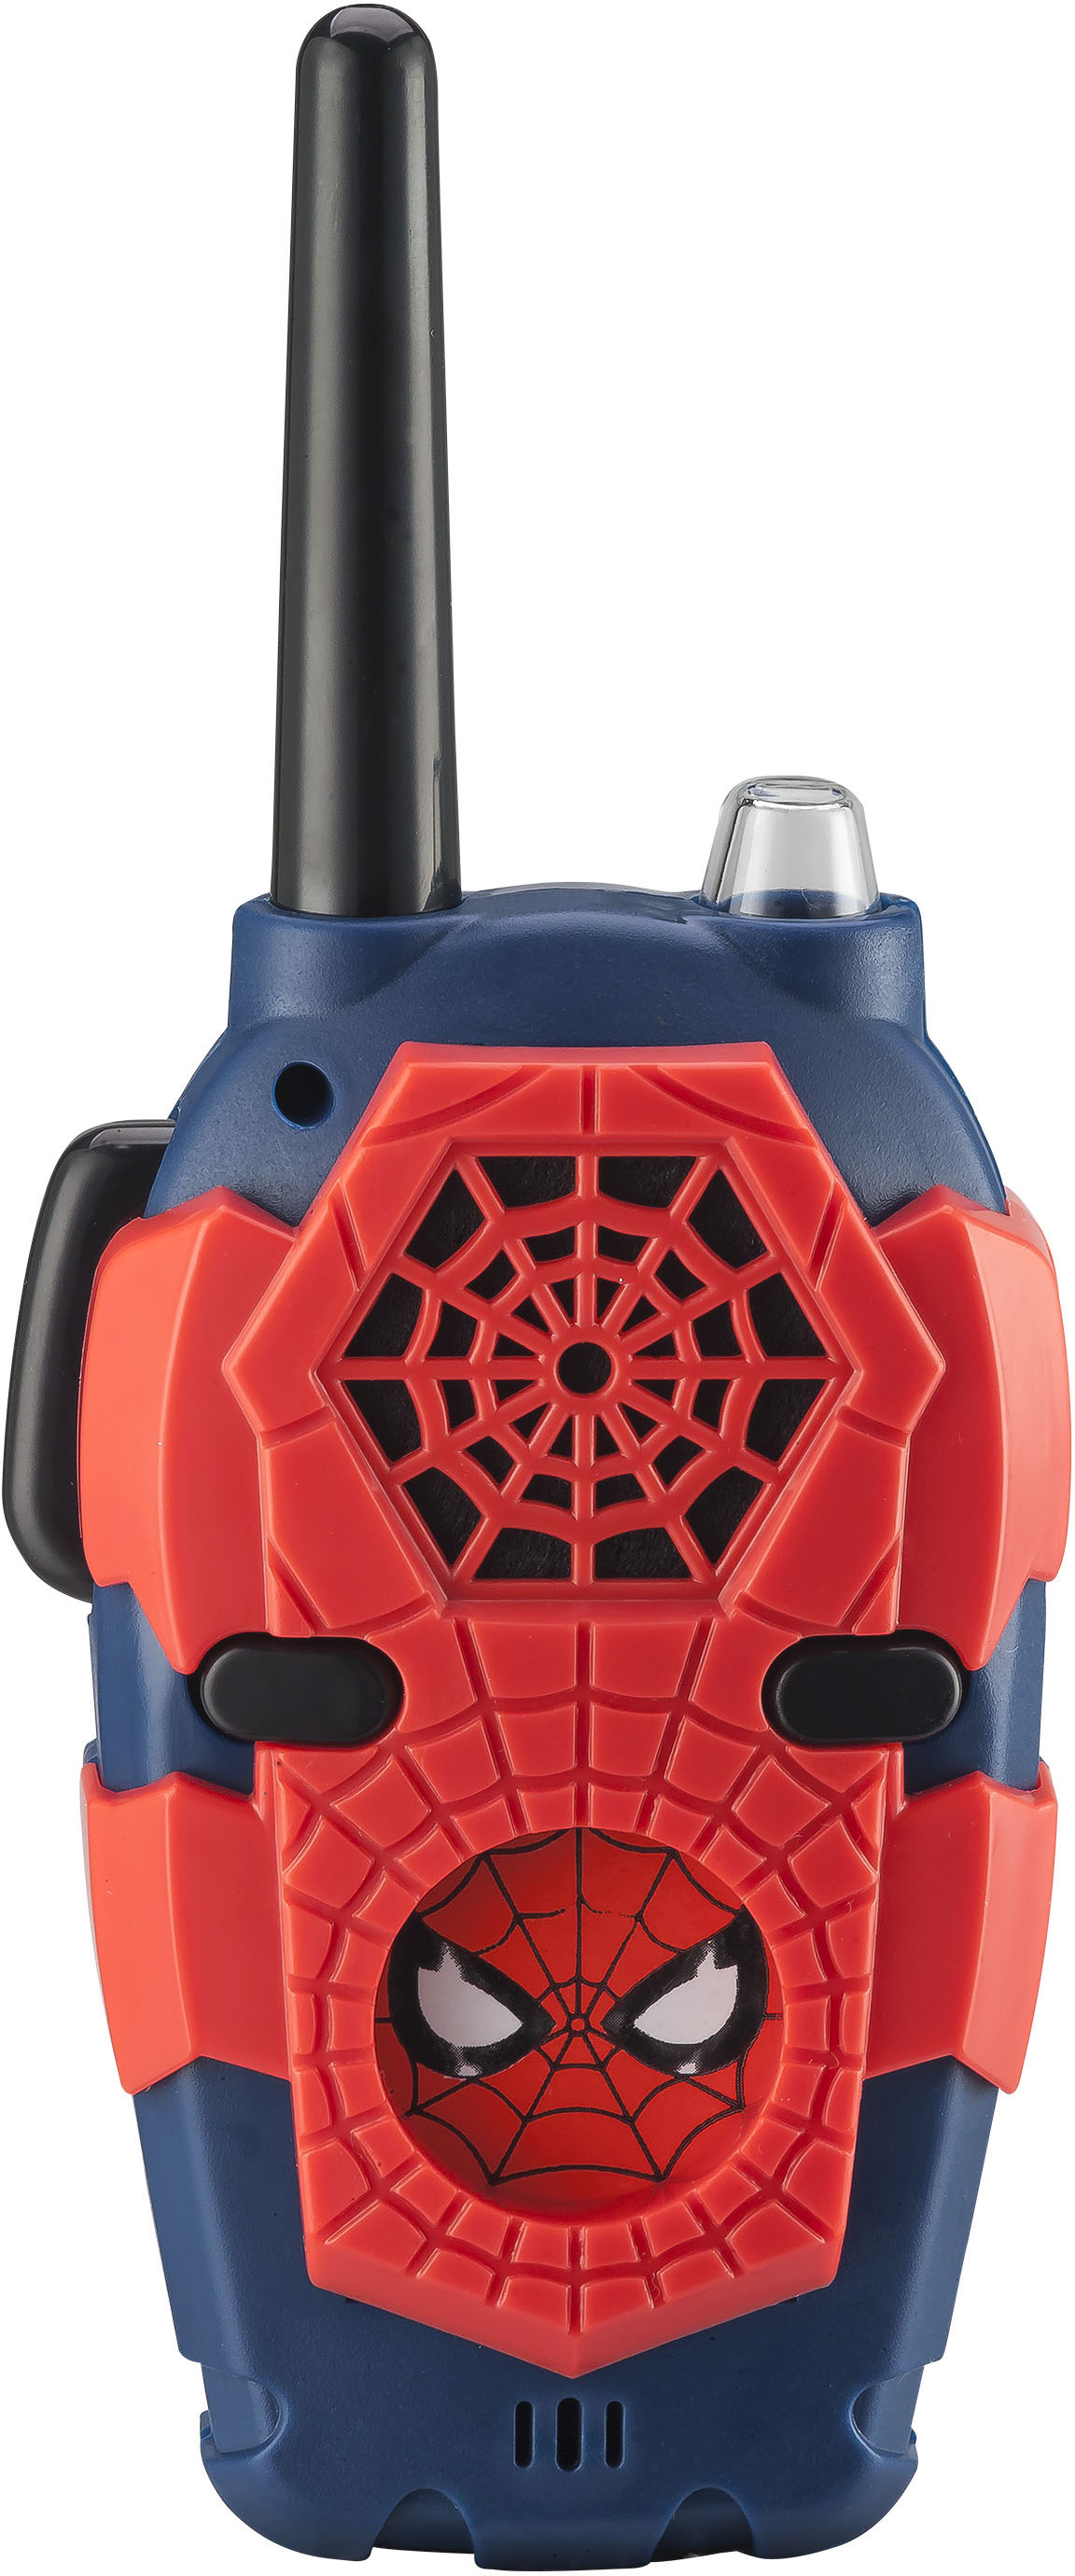 Plastic Red Spider Man Walkie Talkie Toy at Rs 130 in New Delhi